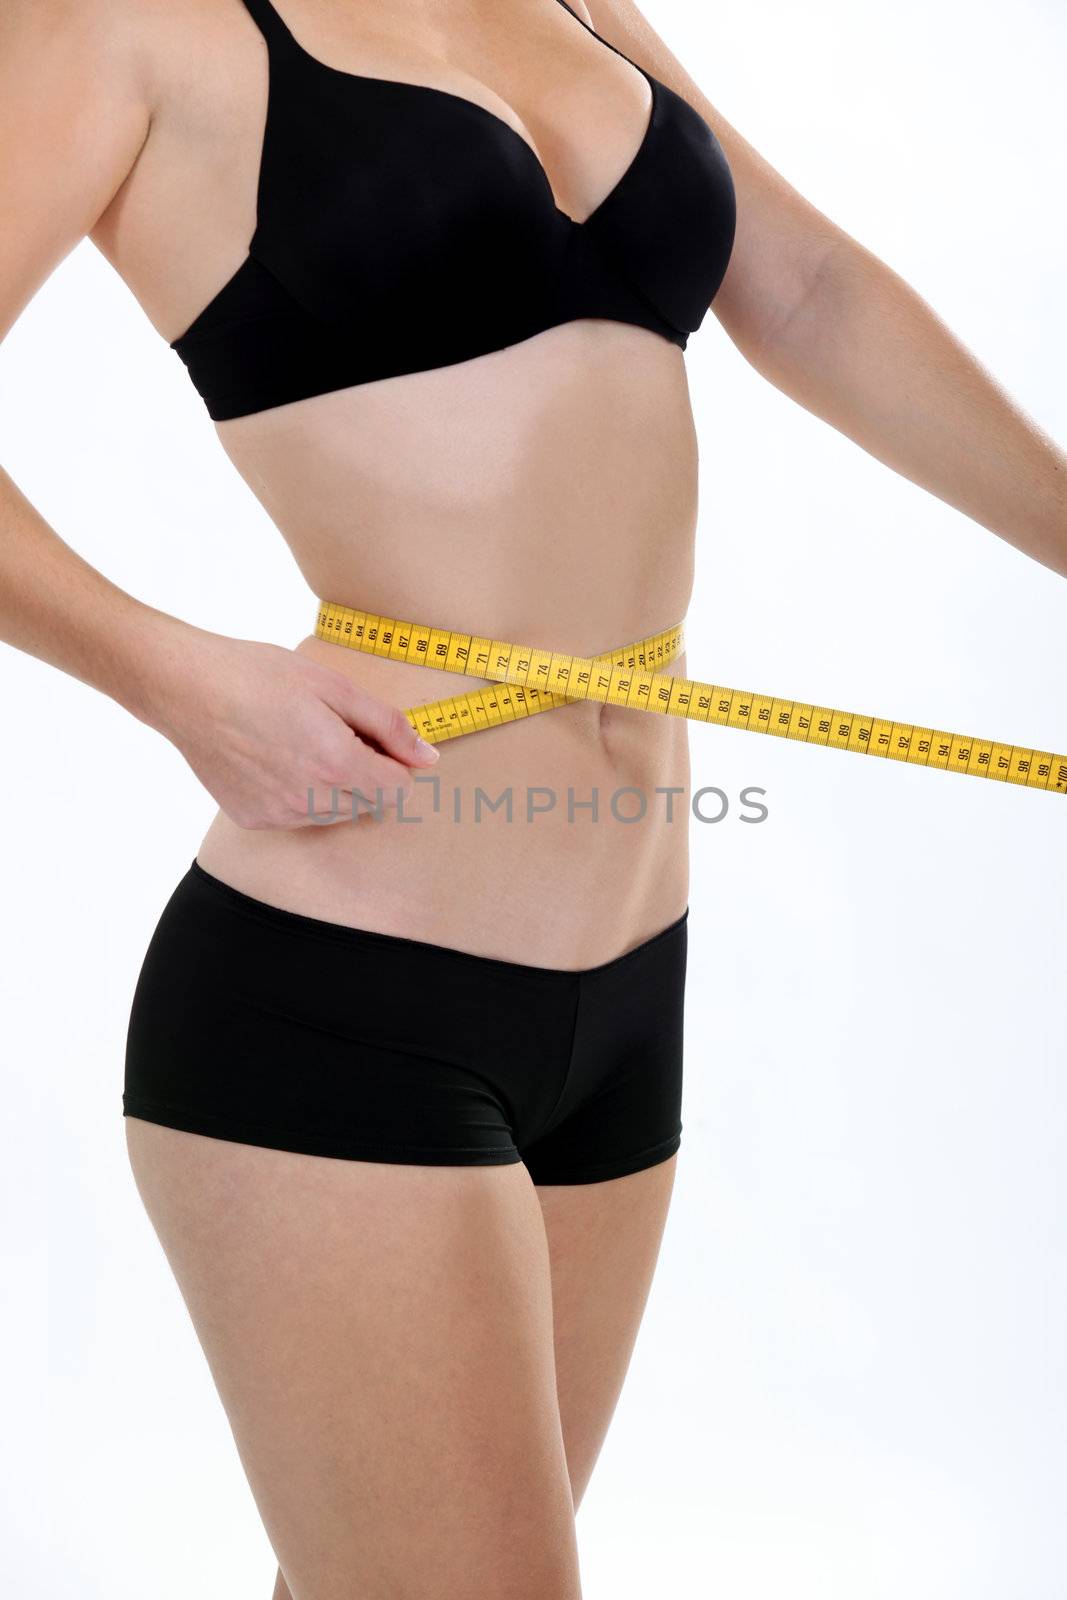 Woman holding a tape measure round her waist